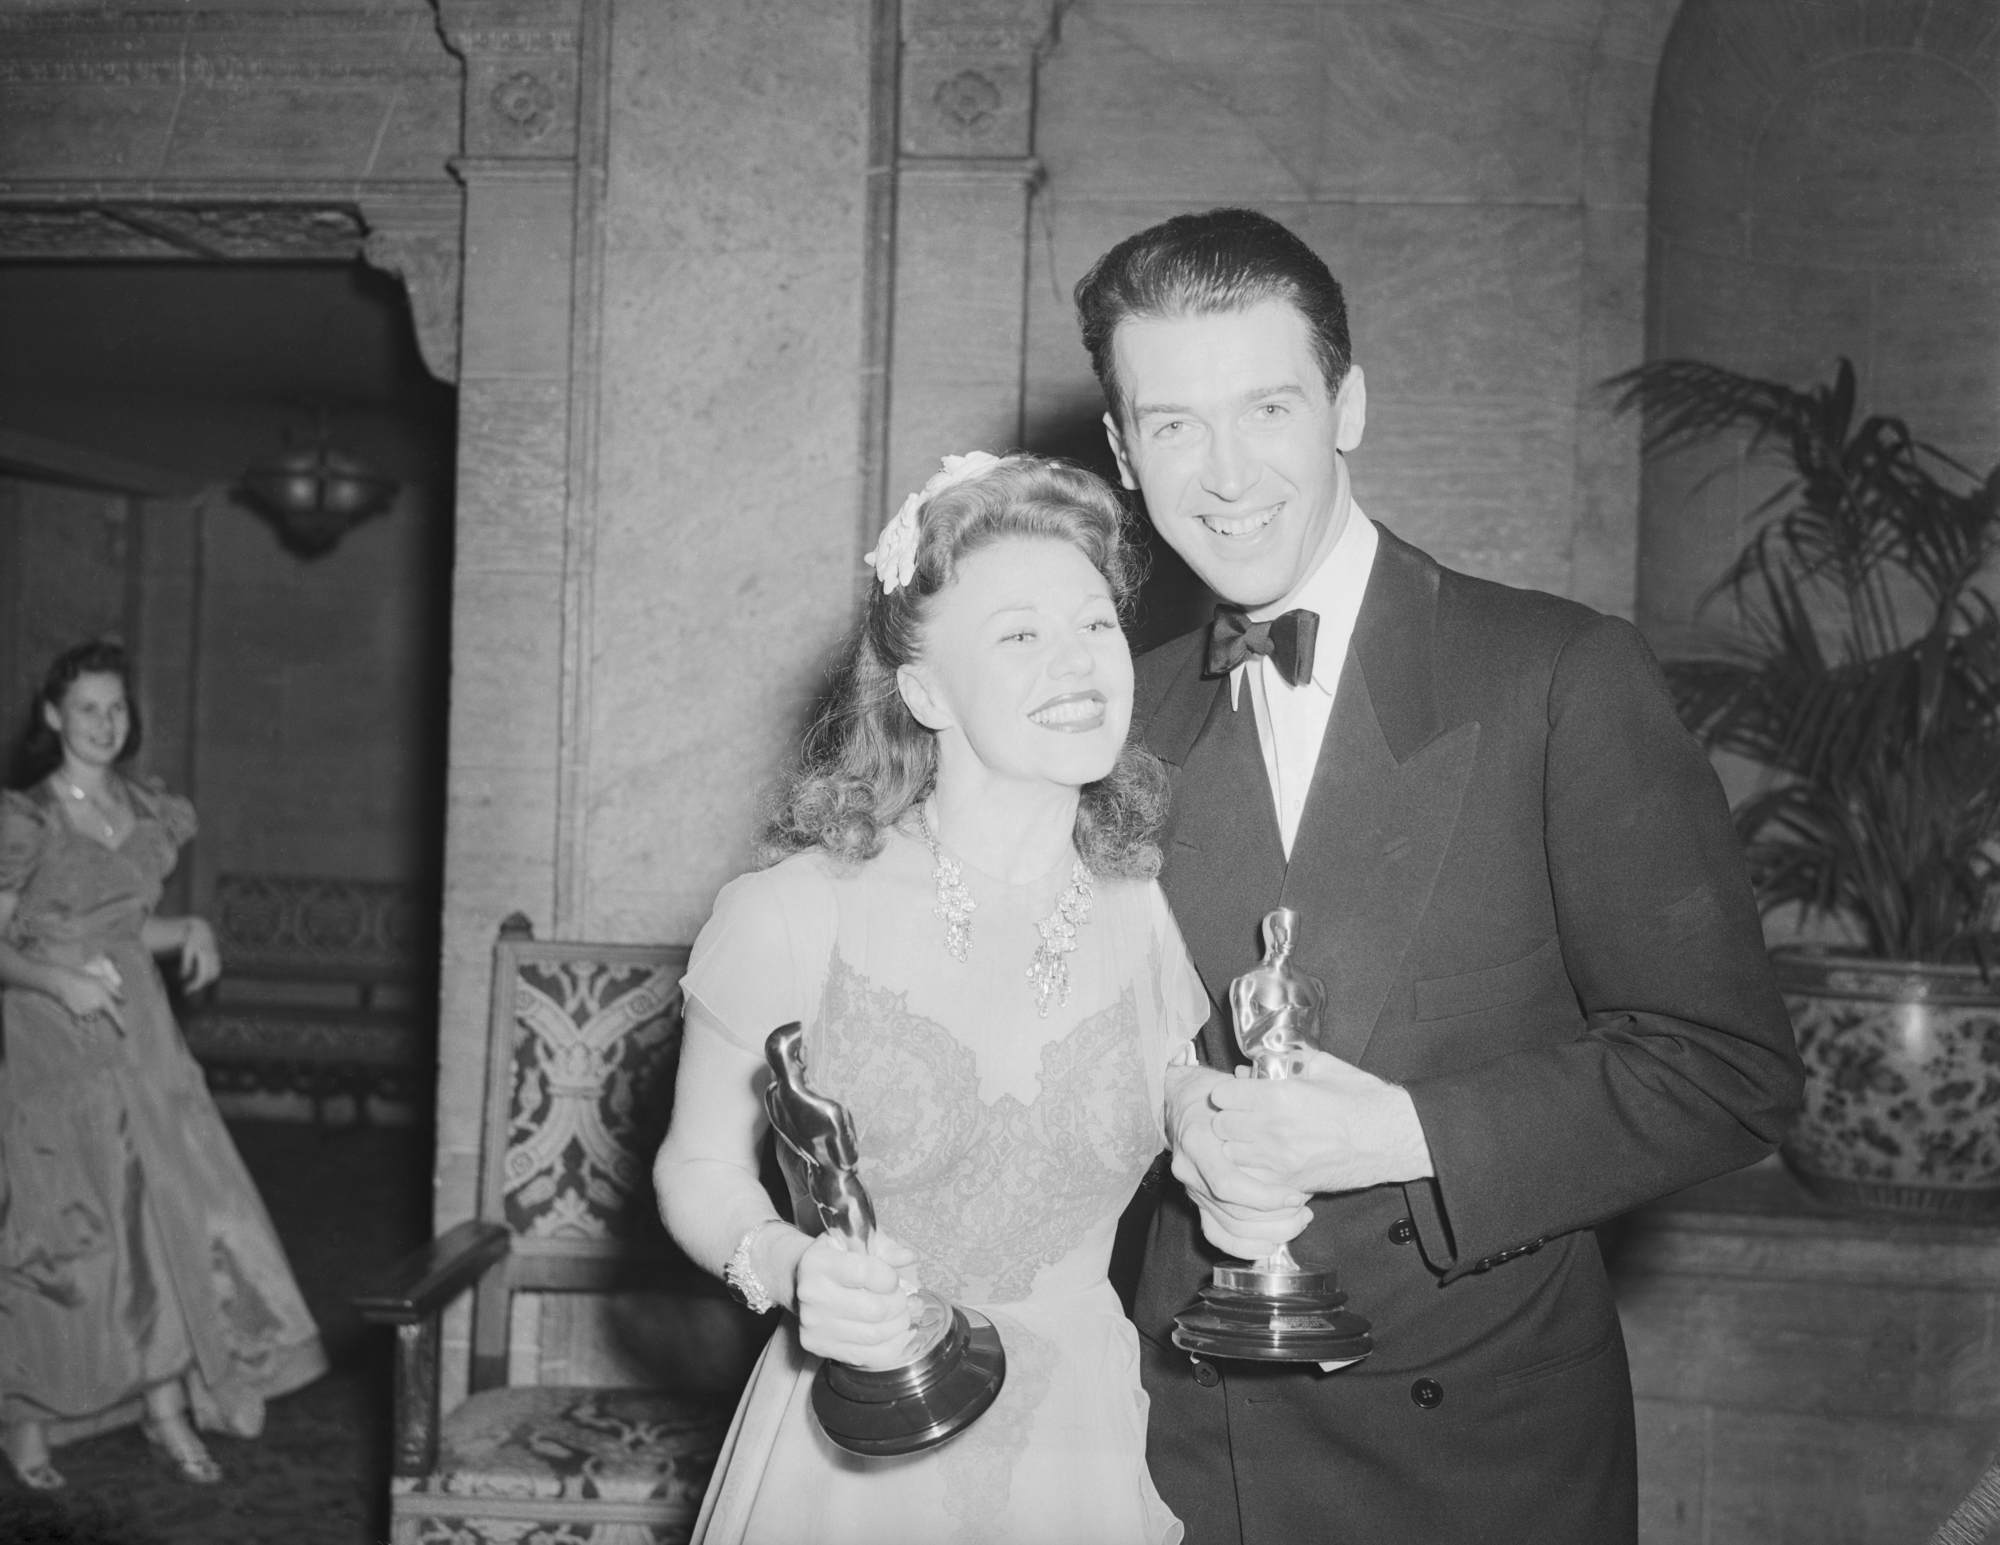 Ginger Rogers and 'The Philadelphia Story' actor Jimmy Stewart holding their Oscar statuettes in a black-and-white picture, smiling.